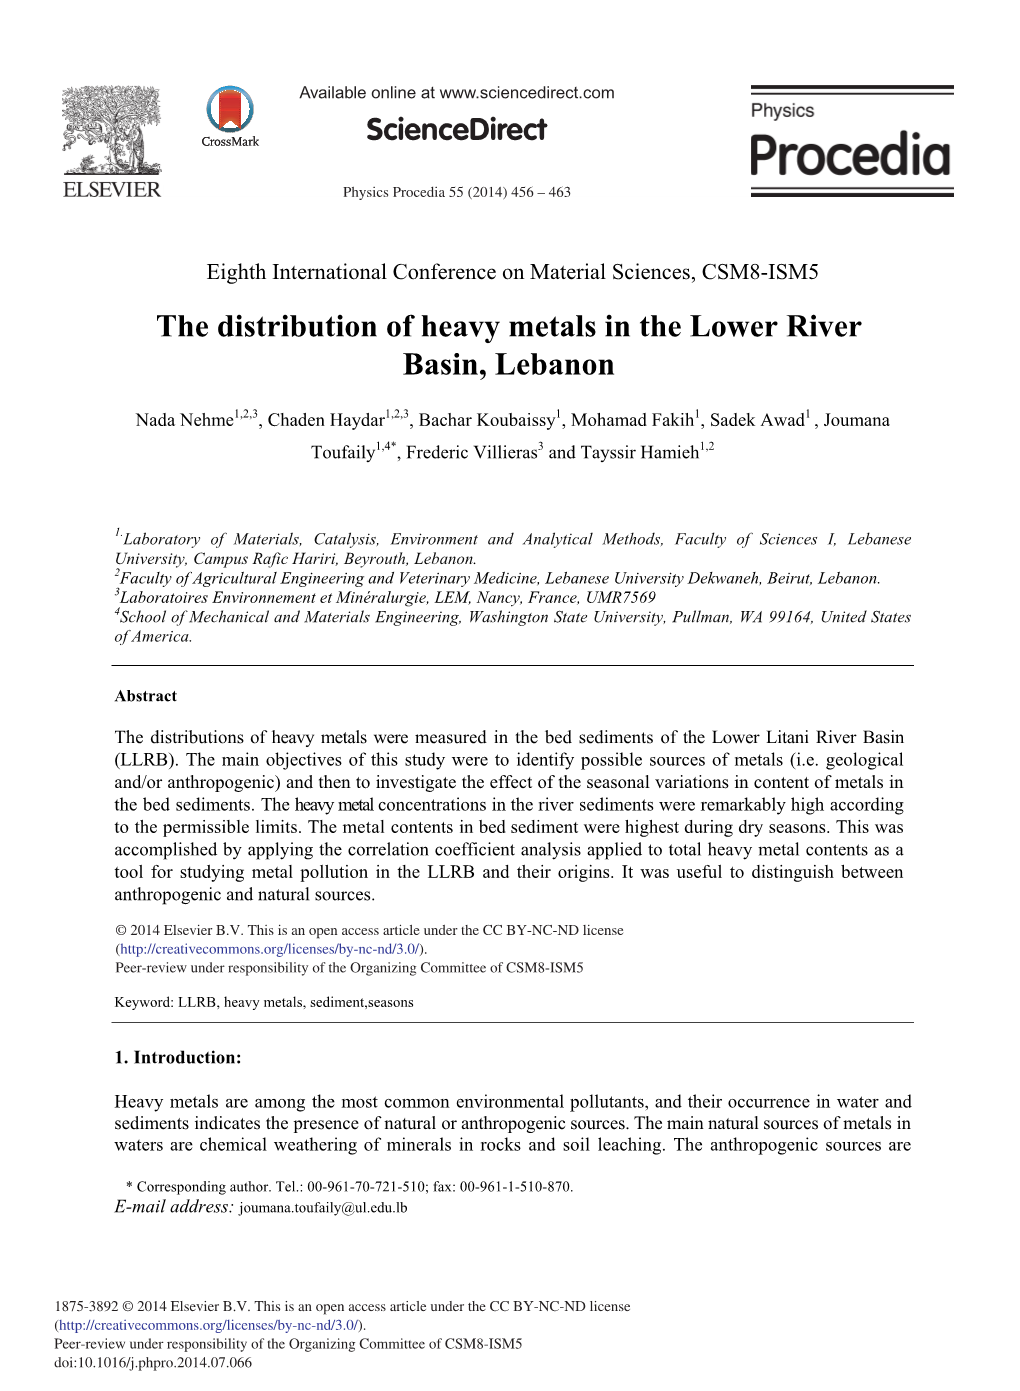 The Distribution of Heavy Metals in the Lower River Basin, Lebanon